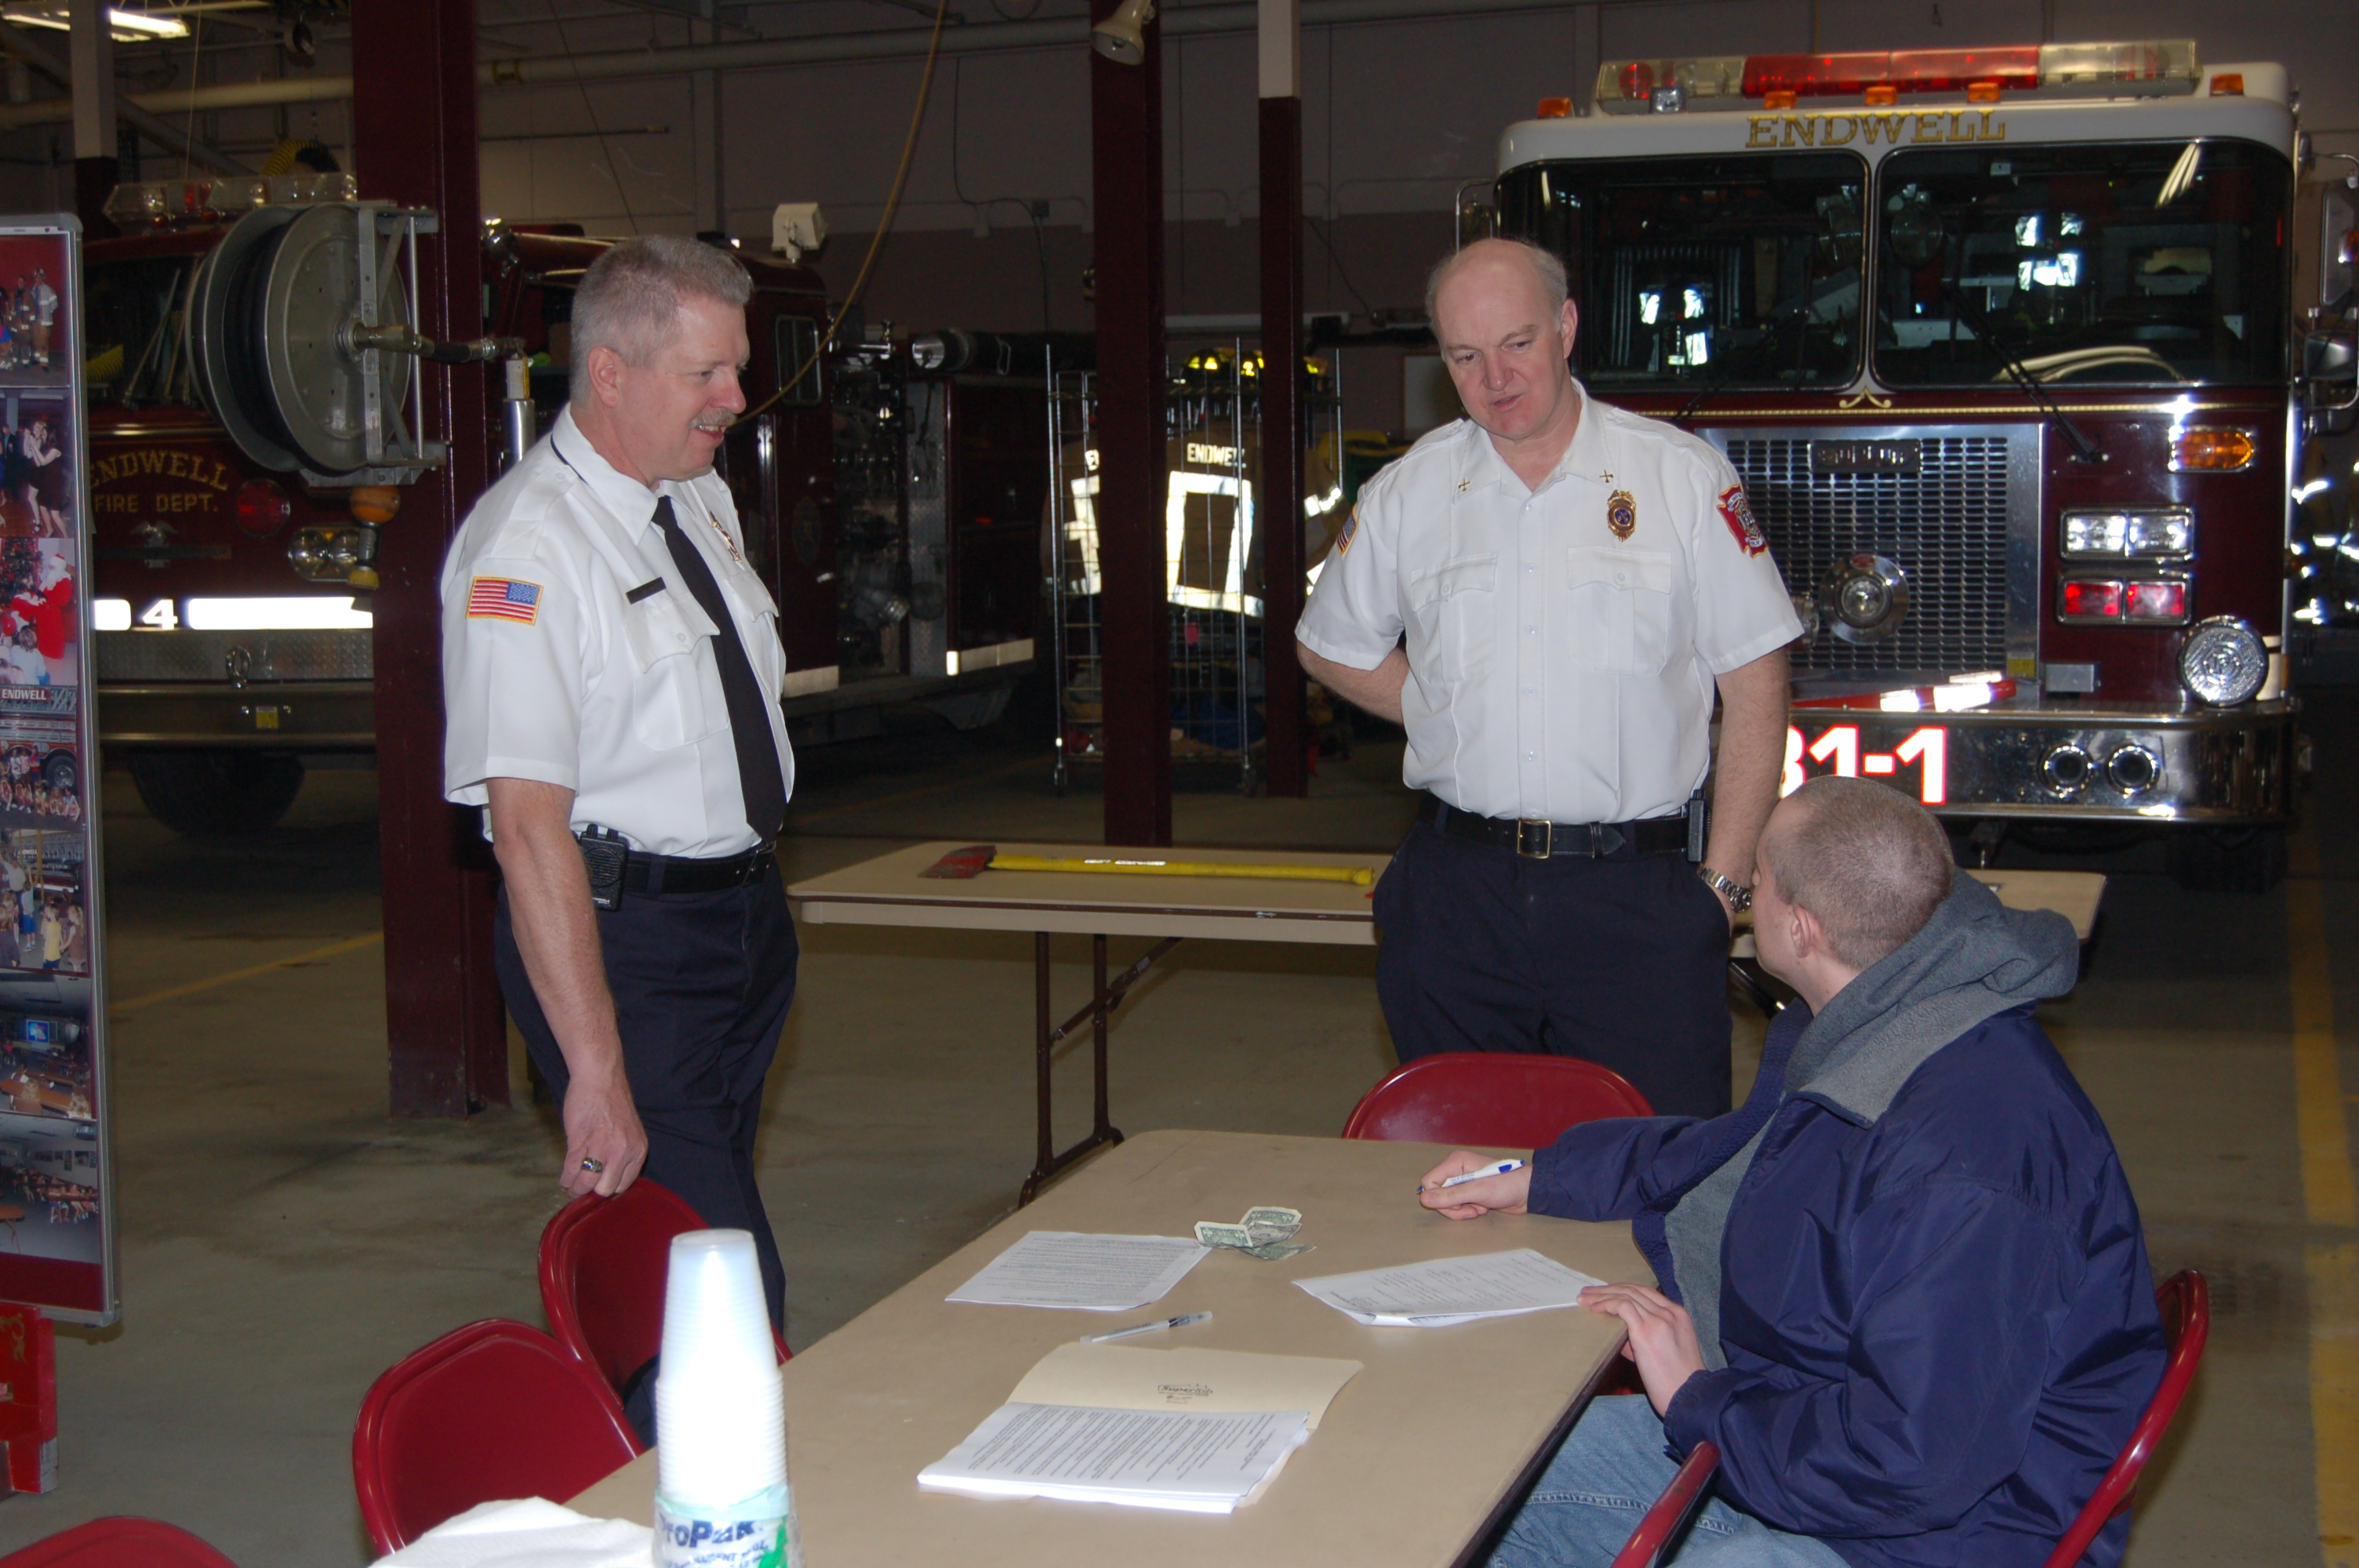 01-15-11  Other - Open House